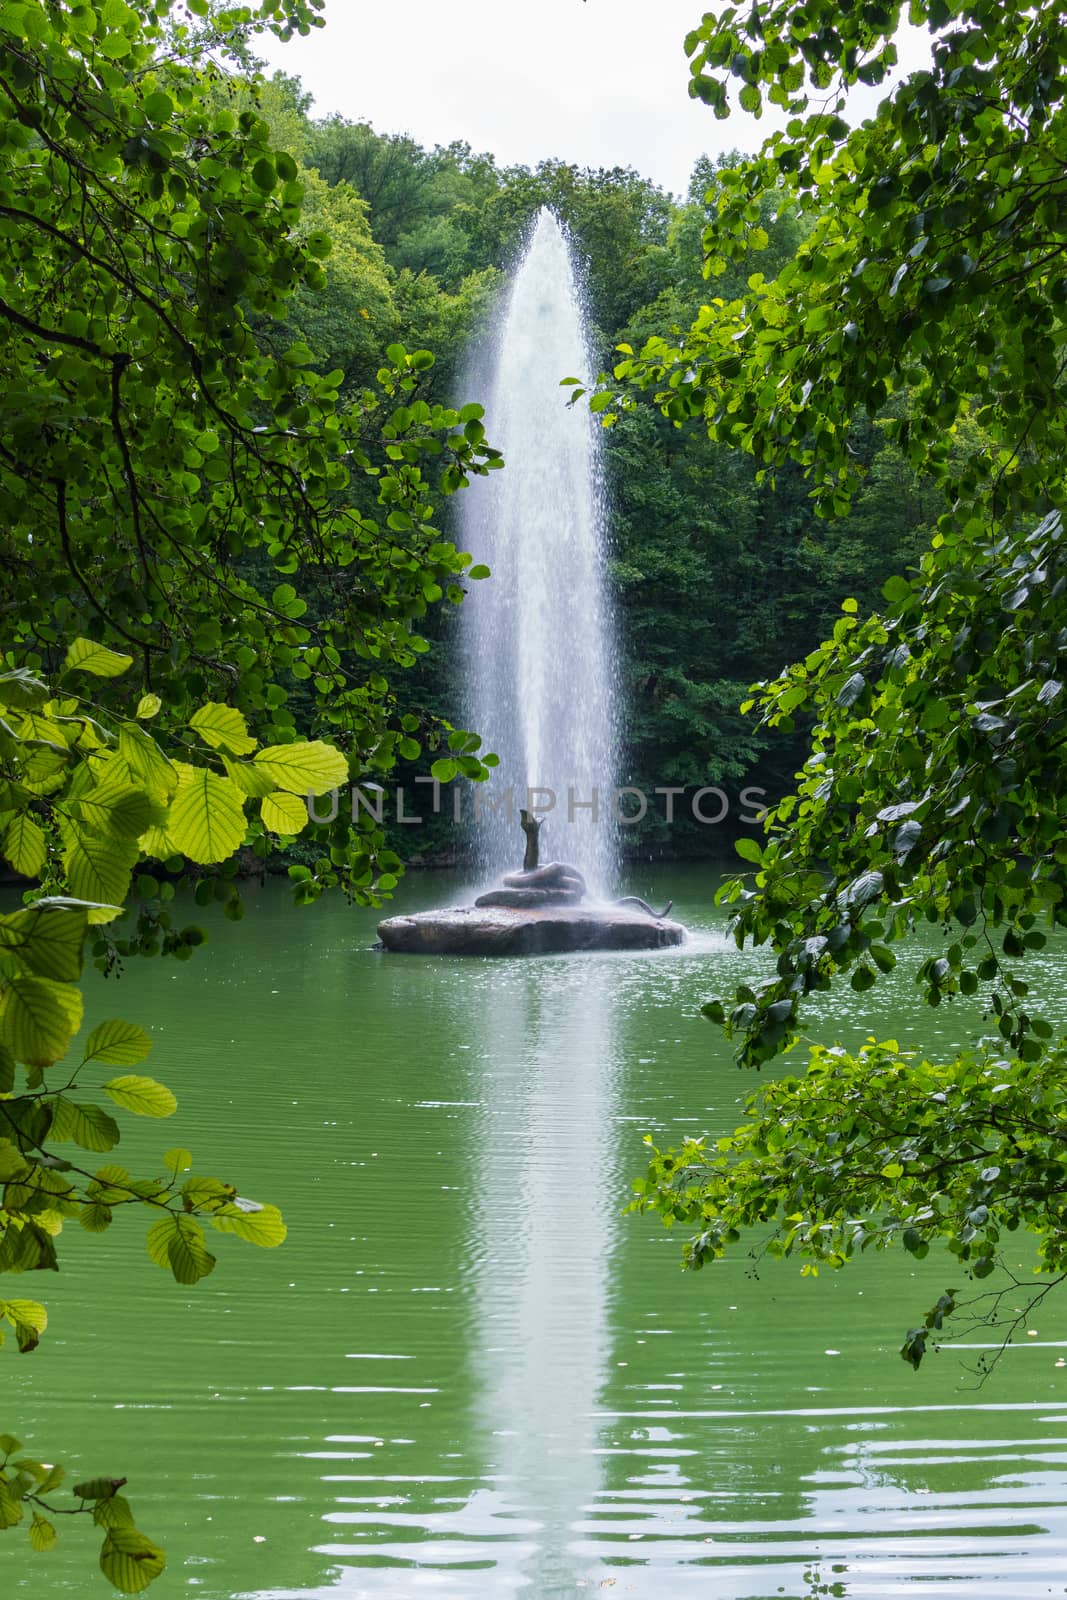 Beautiful fountain with a transparent stream of water beating up to the very tops of trees growing on the shore of the pond.